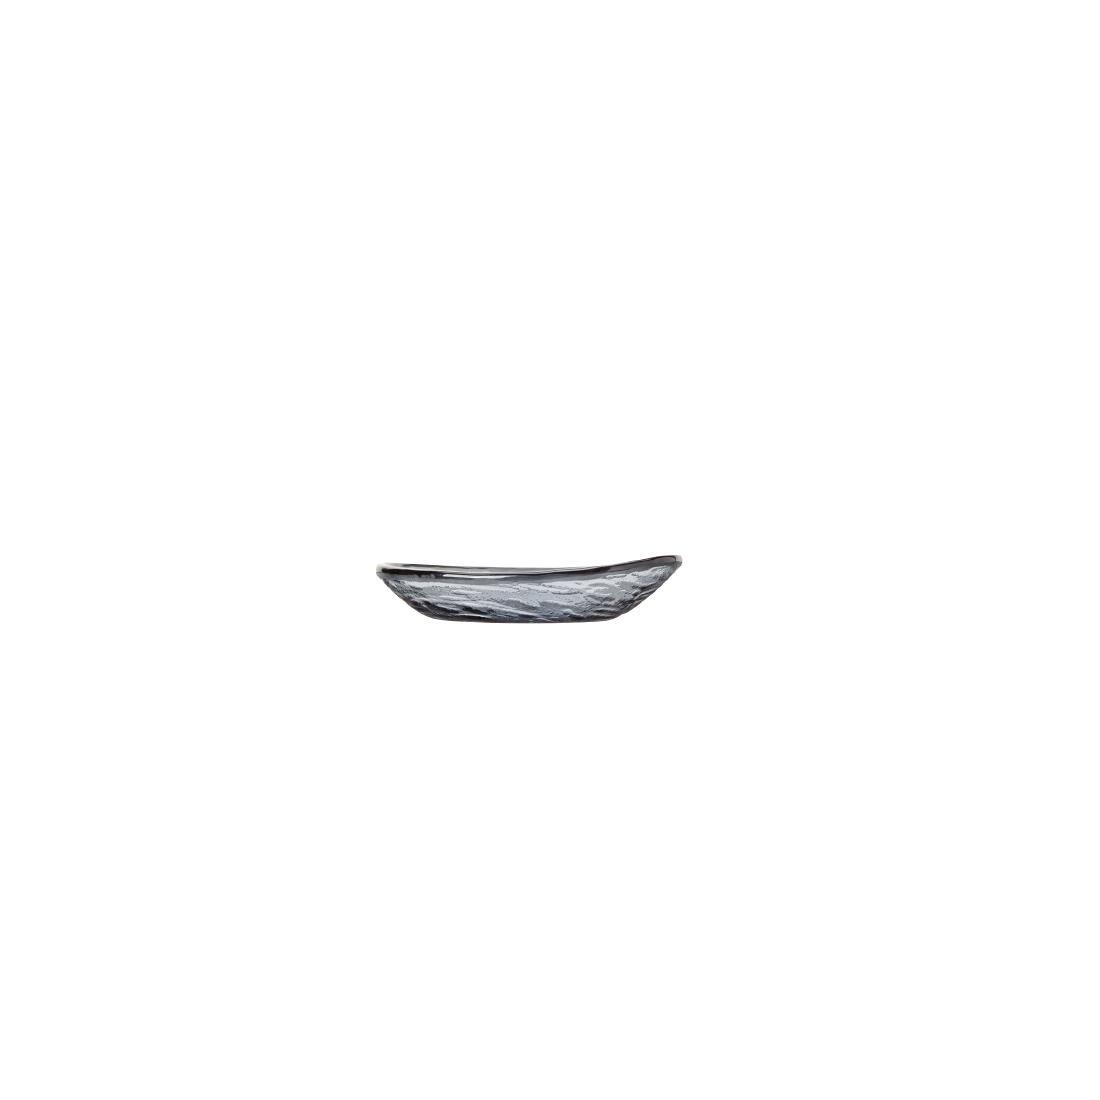 Steelite Scape Glass Smoked Oval Bowls 125mm (Pack of 12) - VV716  - 2